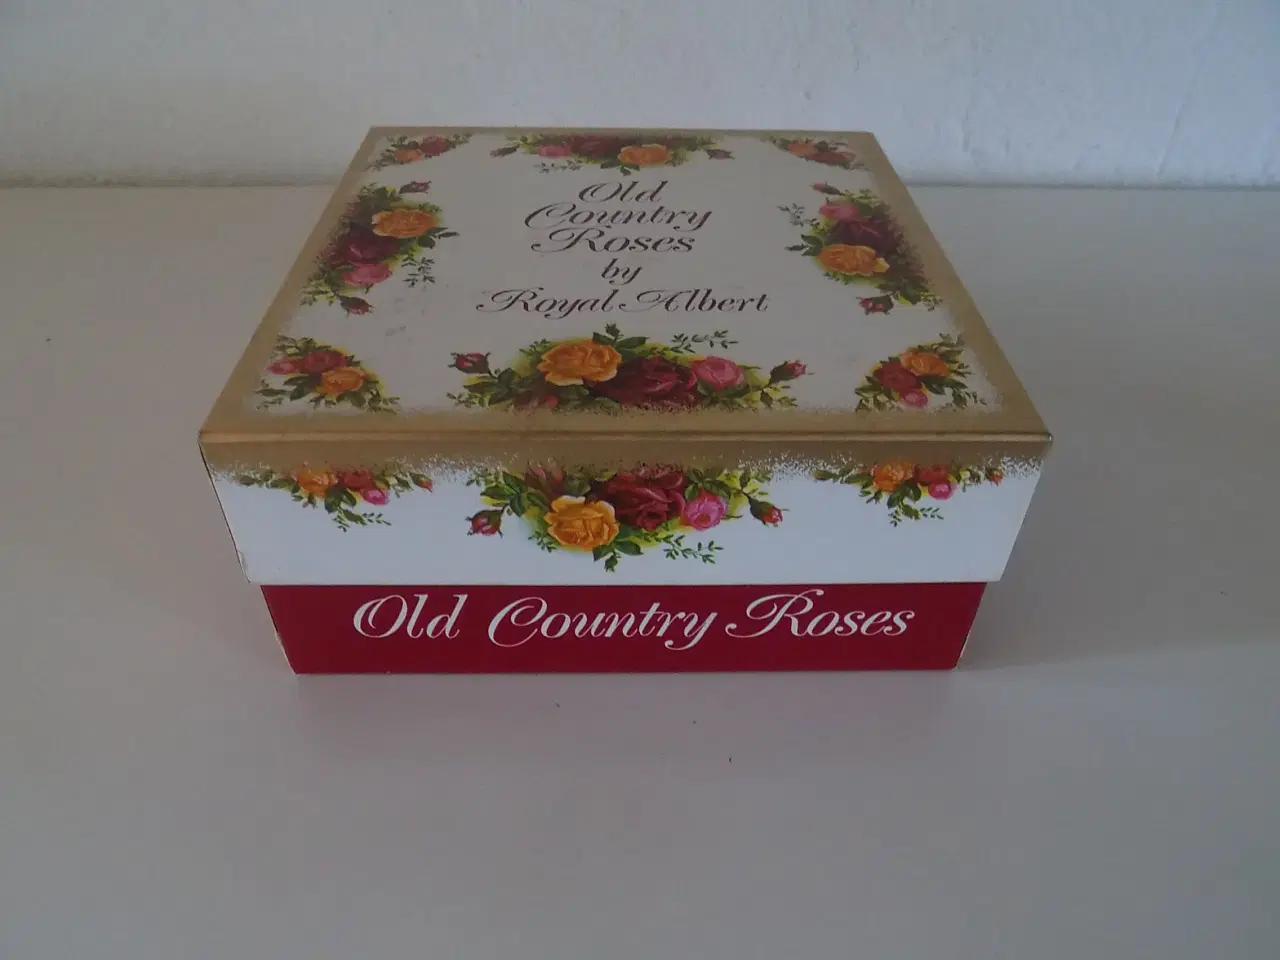 Billede 2 - Lysestage - Old Country Roses